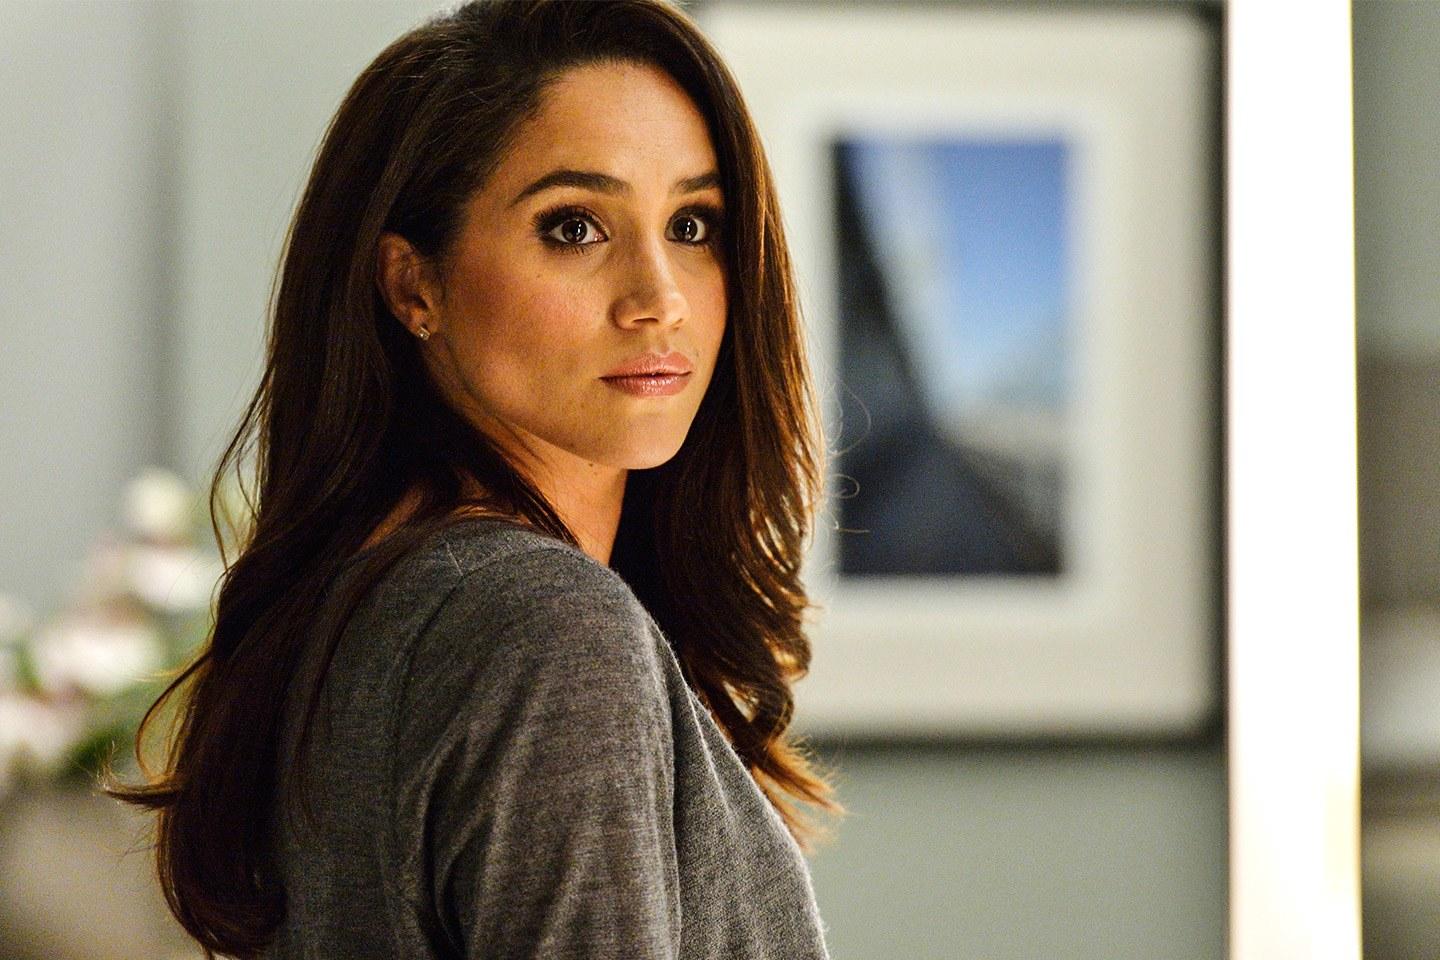 Meghan Markle in US drama 'Suits'